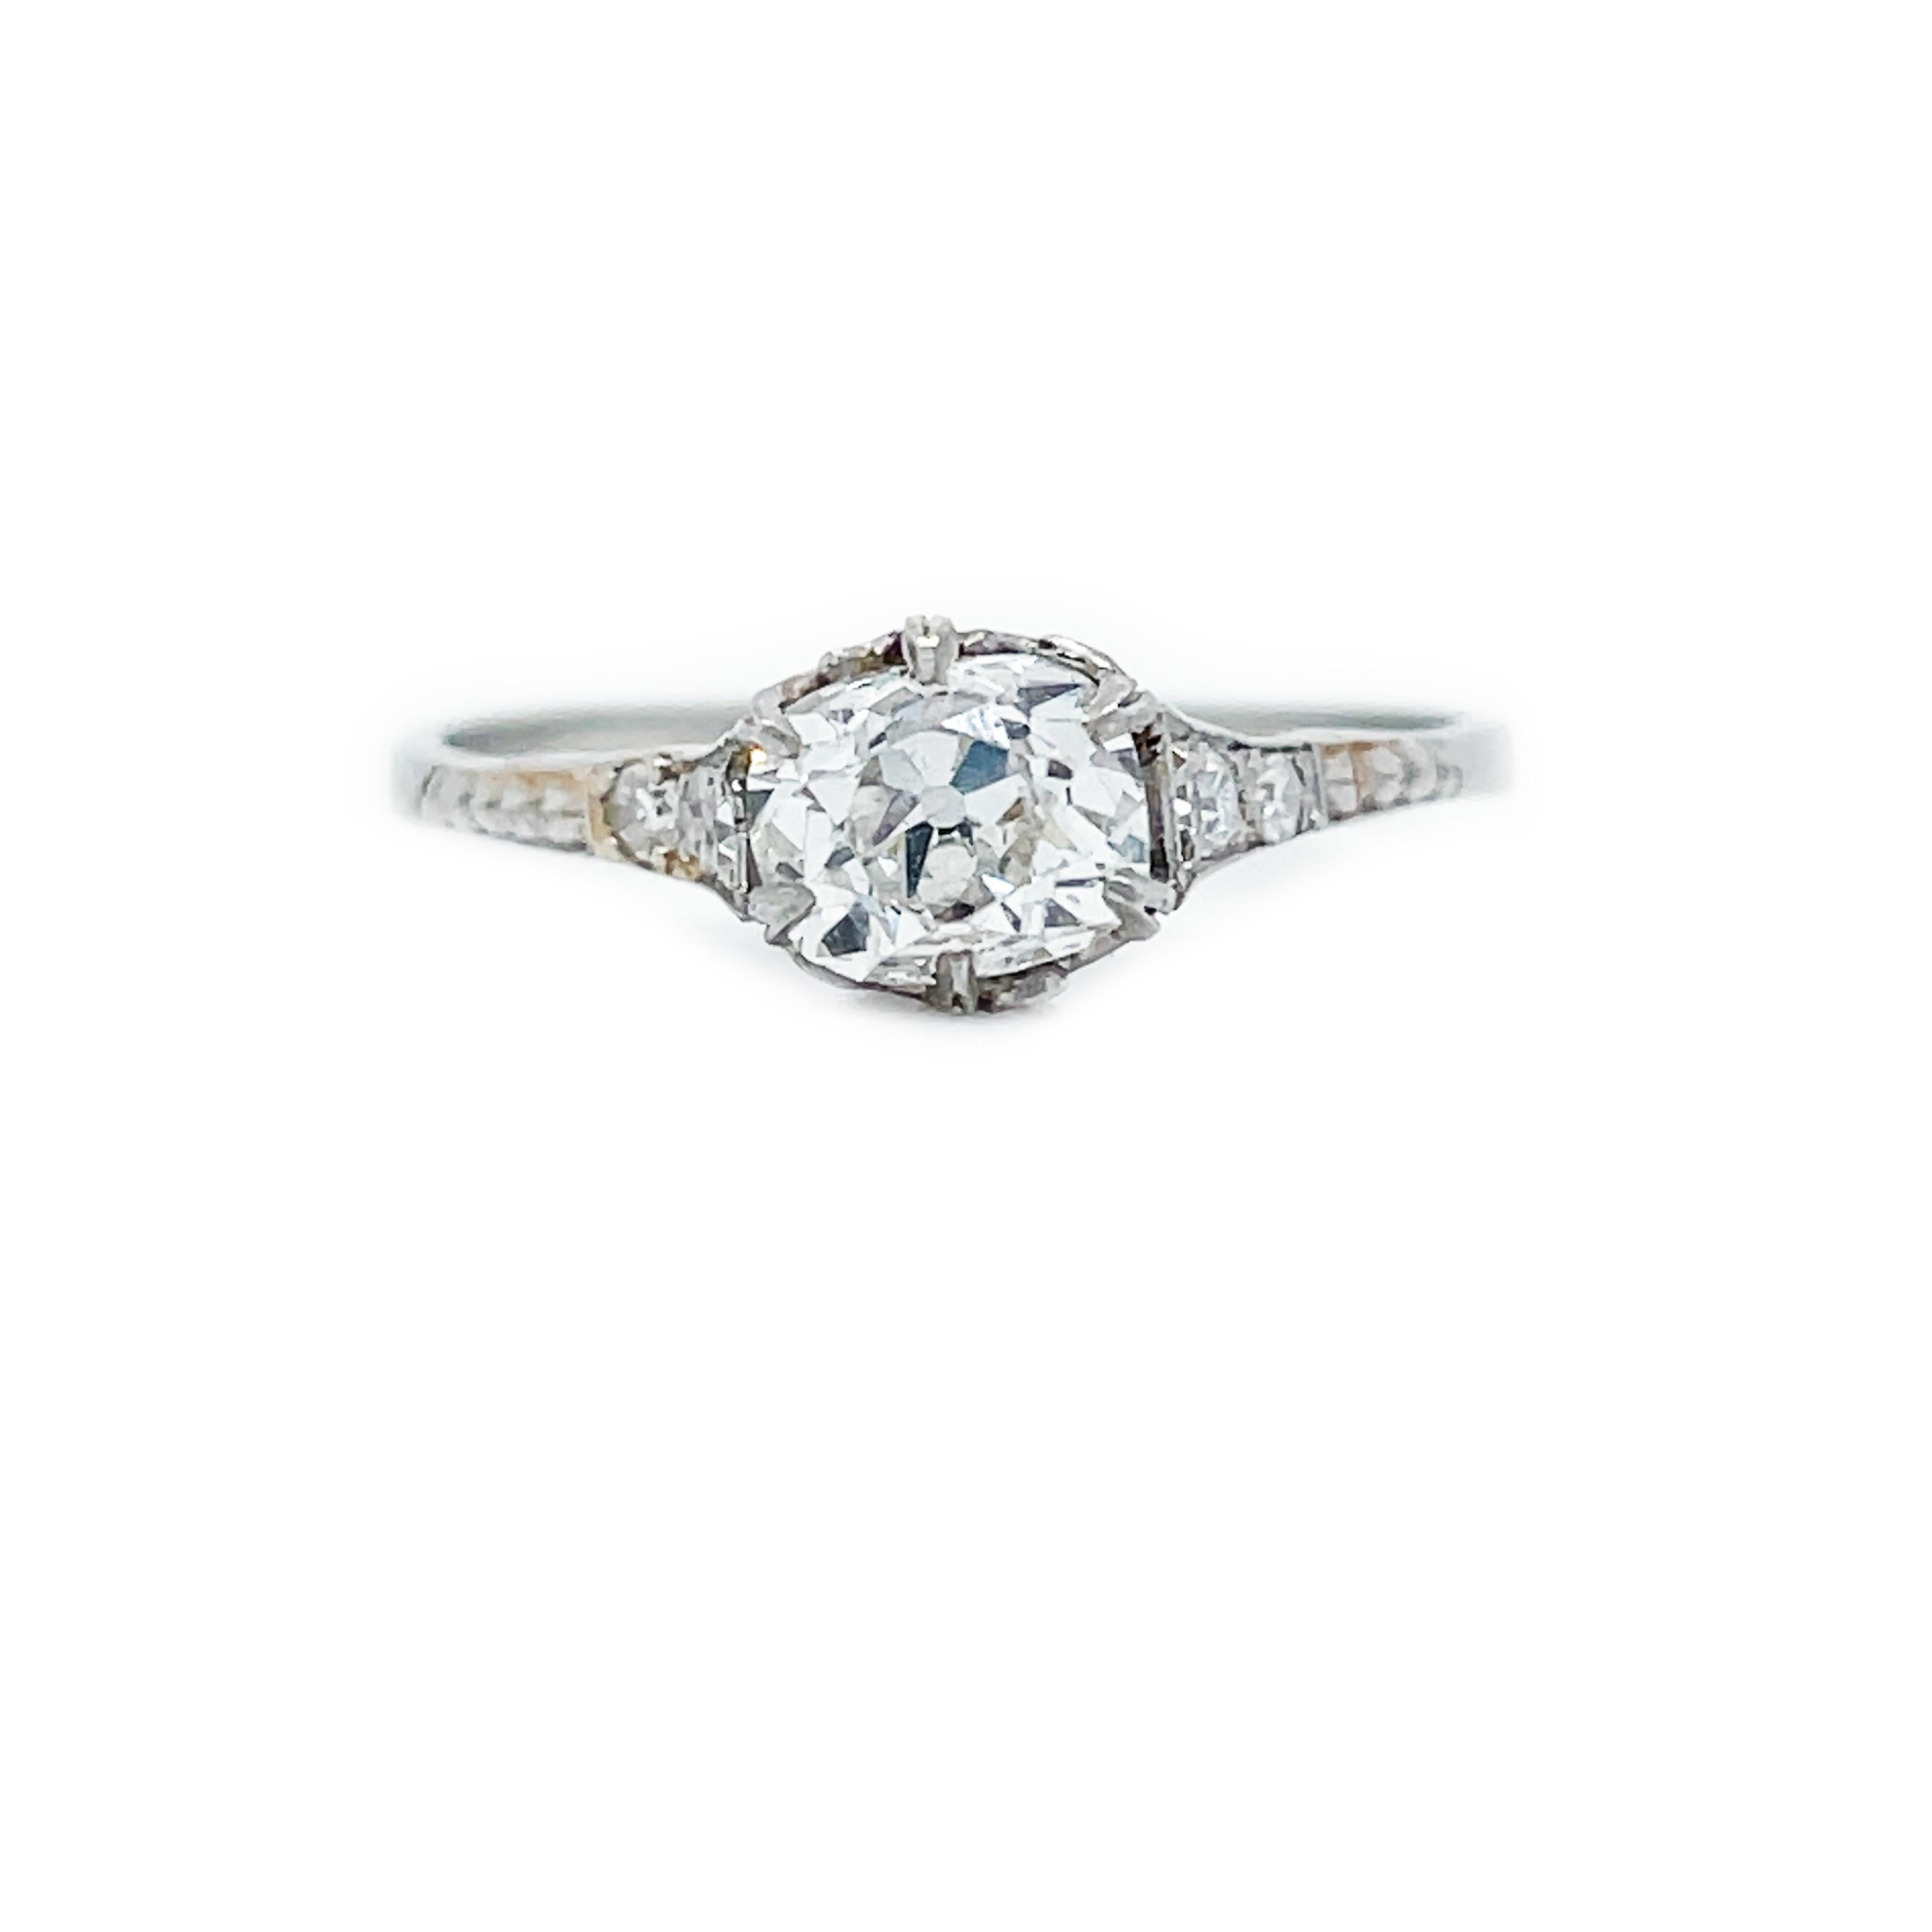 This is a gorgeous Edwardian engagement ring showcasing a dreamy old mine-cut diamond set in Platinum! Crowned by a 0.79 ct icy white old mine cut diamond at its center, this platinum set engagement ring is adorned with glittering diamond set